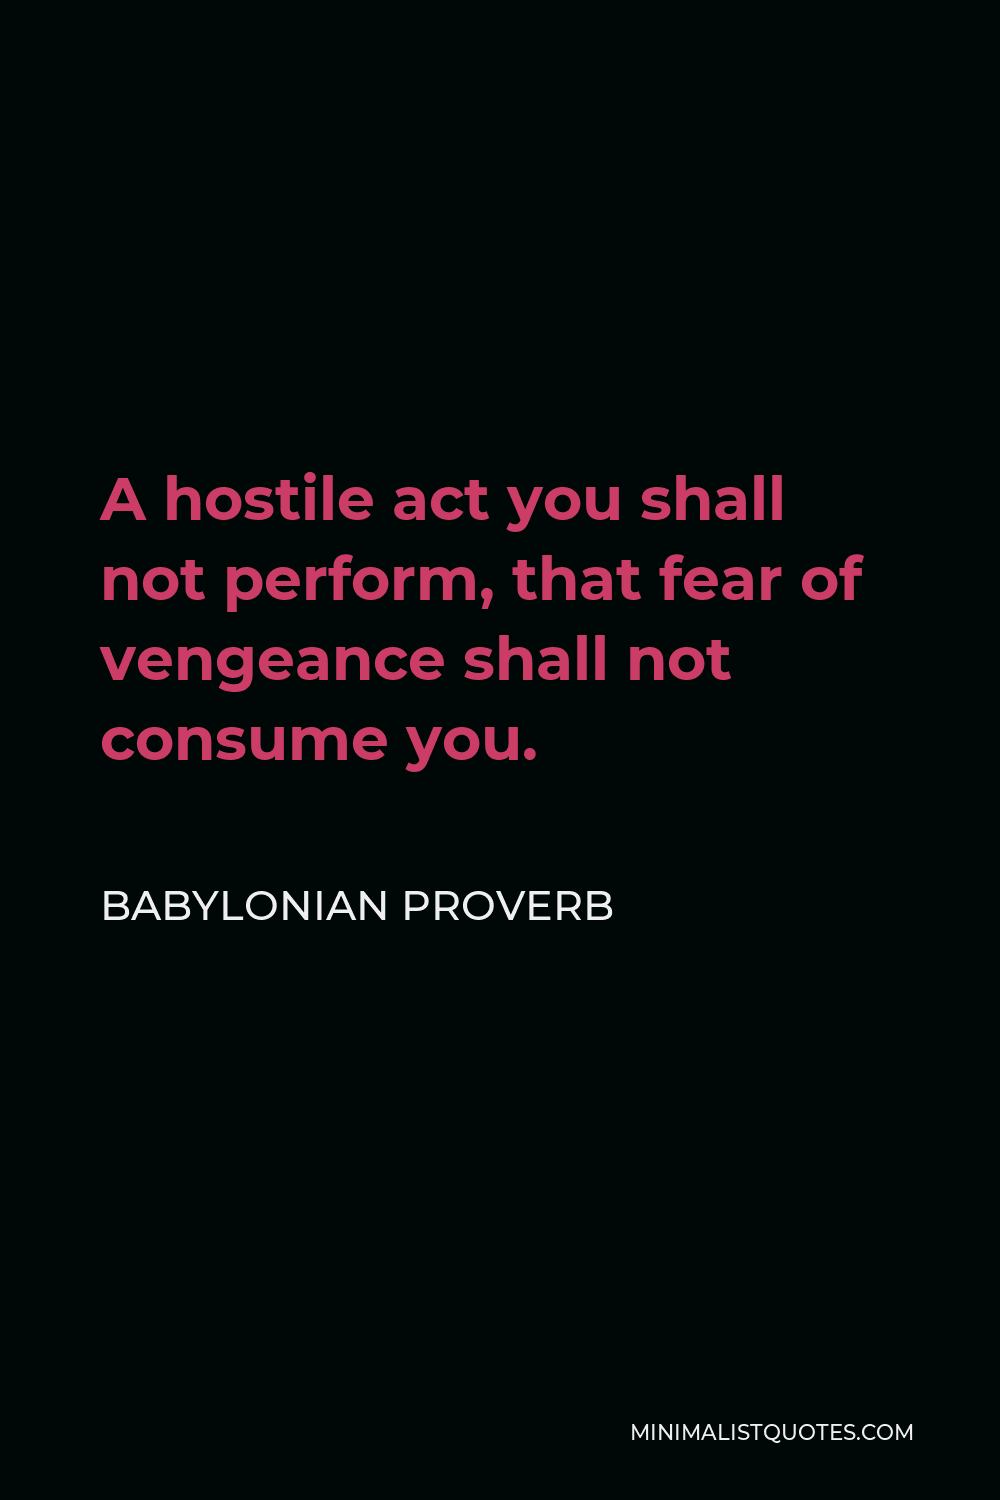 Babylonian Proverb Quote - A hostile act you shall not perform, that fear of vengeance shall not consume you.